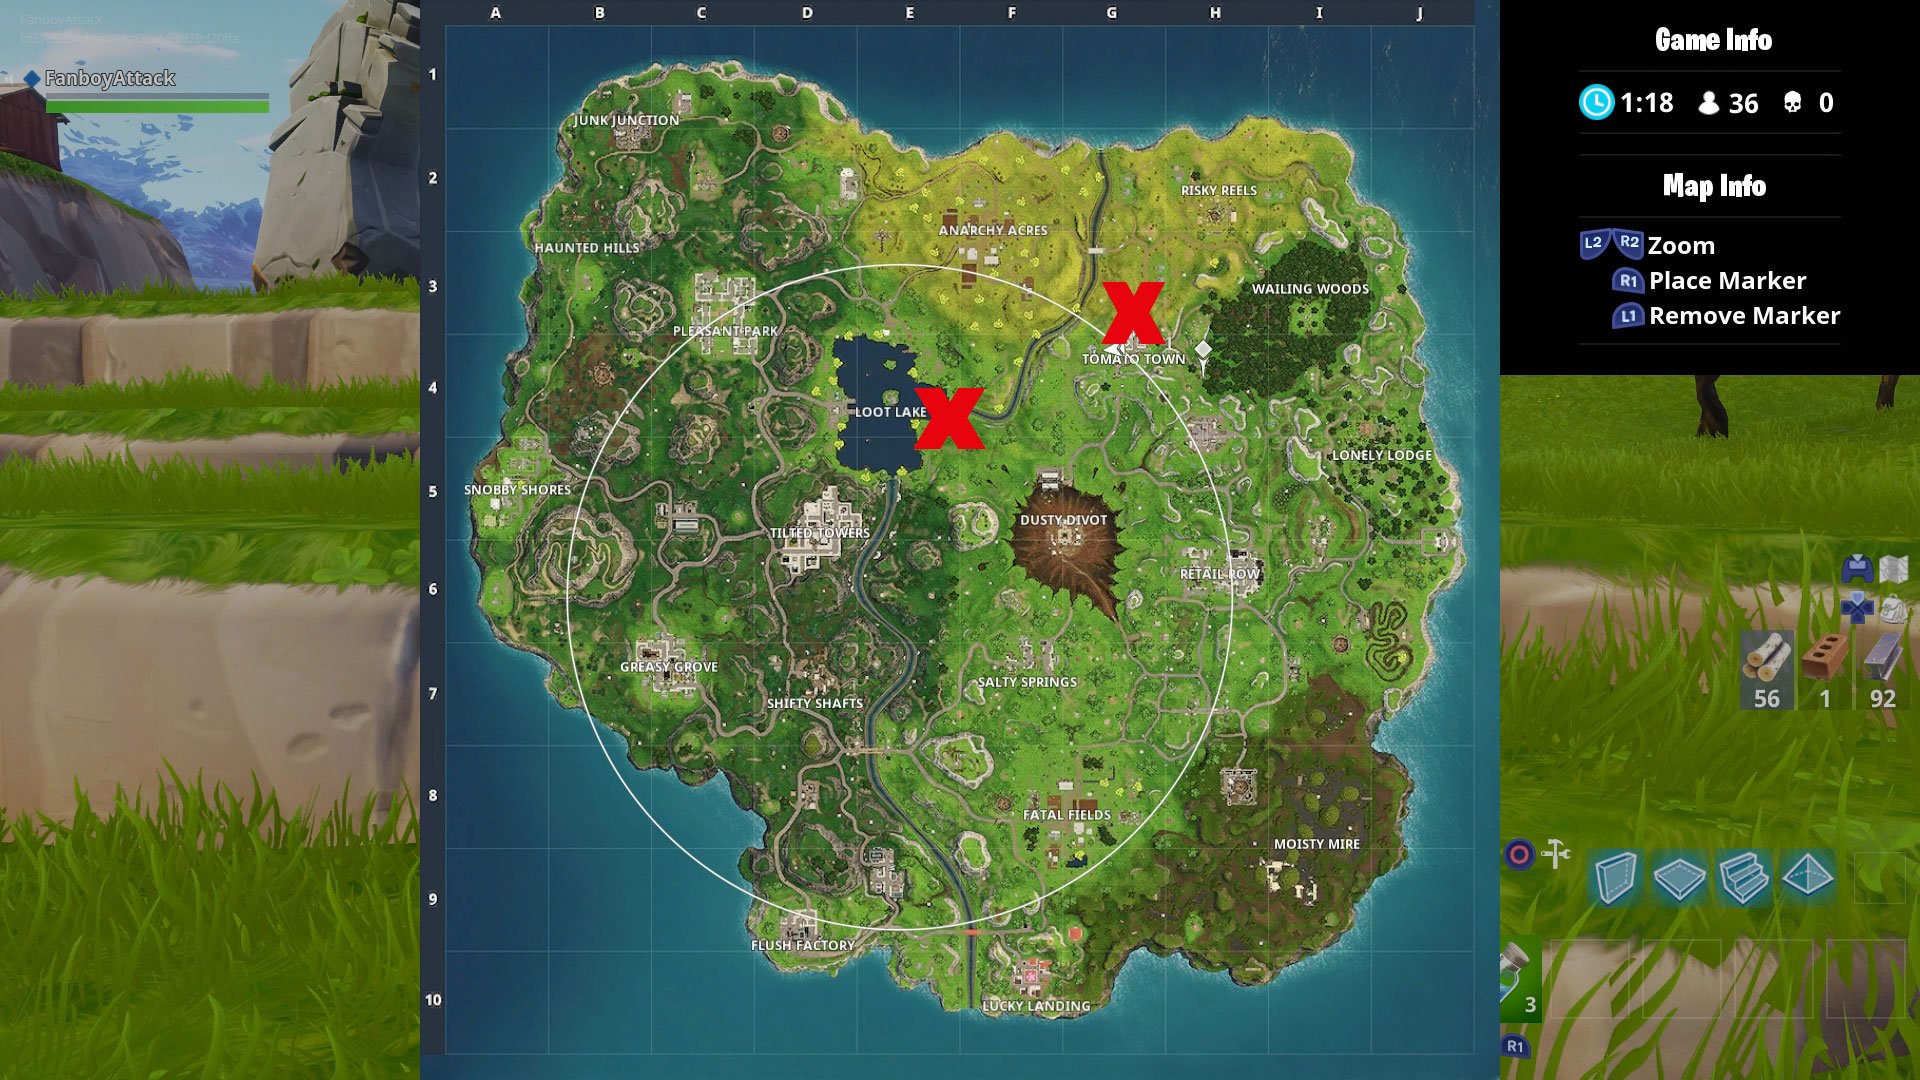 Tomato Town Map Fortnite Fortnite Battle Royale Tomato Town Treasure Map Location Attack Of The Fanboy